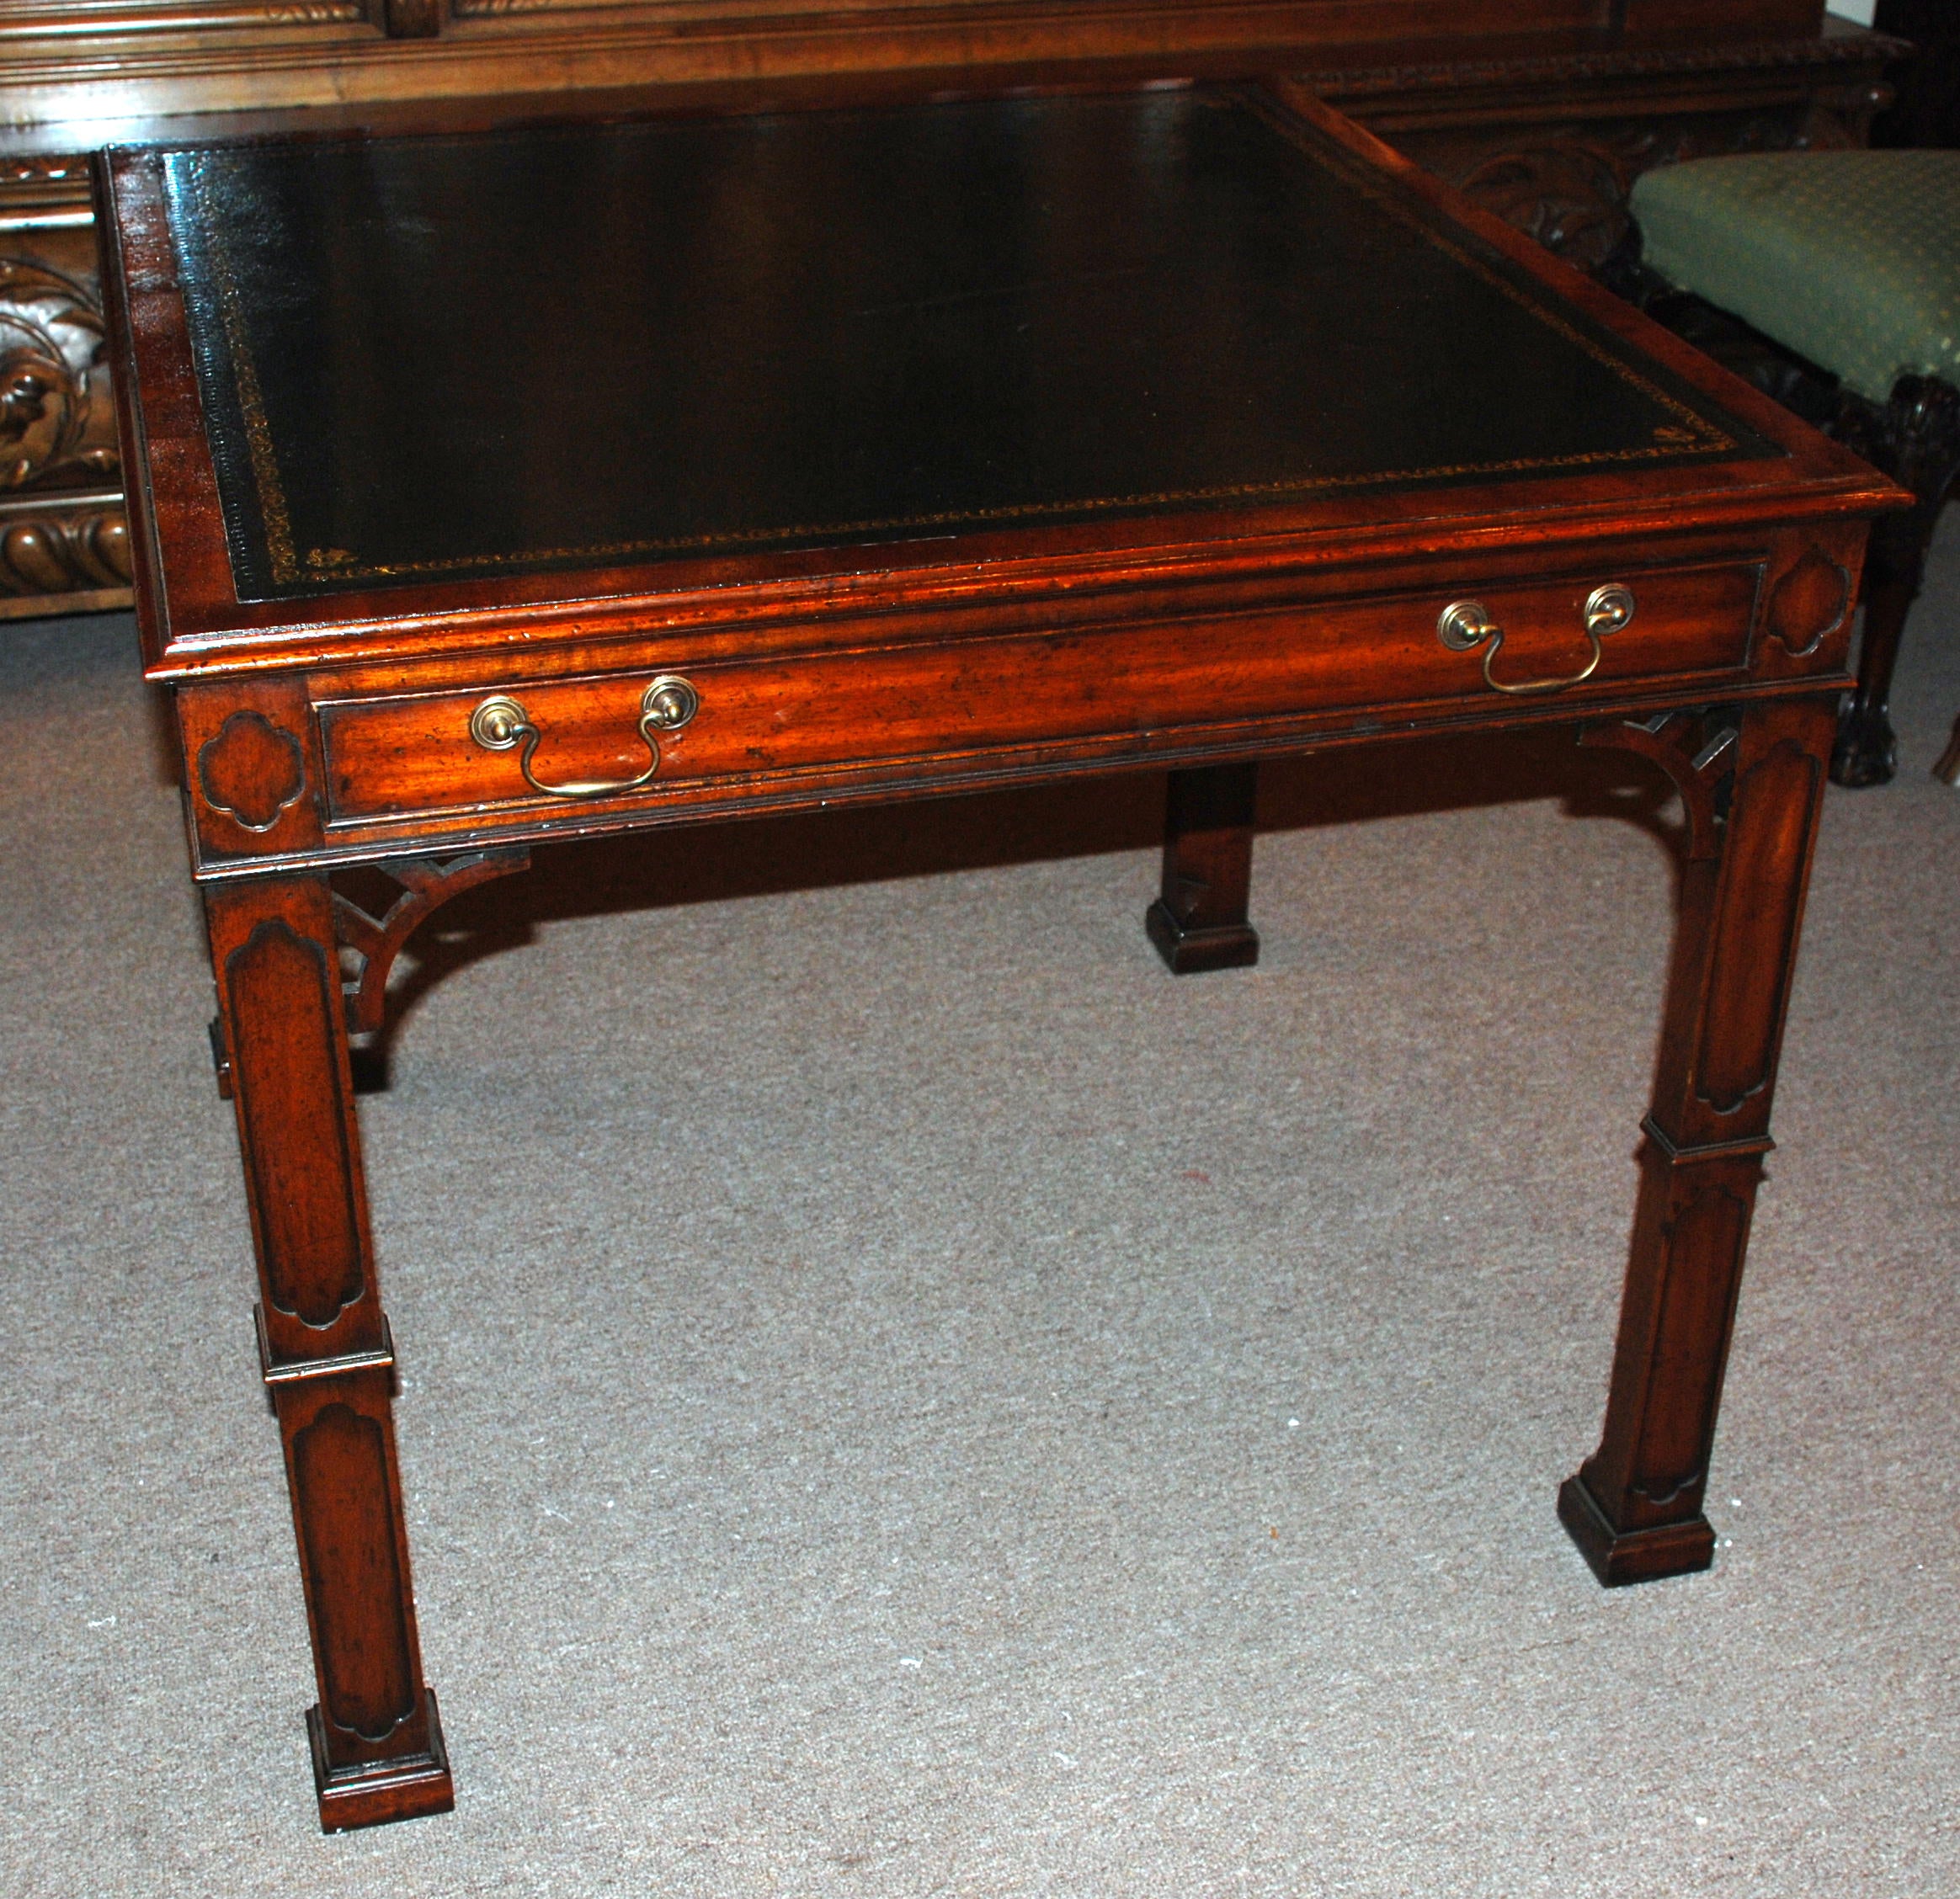 English Handmade Mahogany Card Table with Leather Top